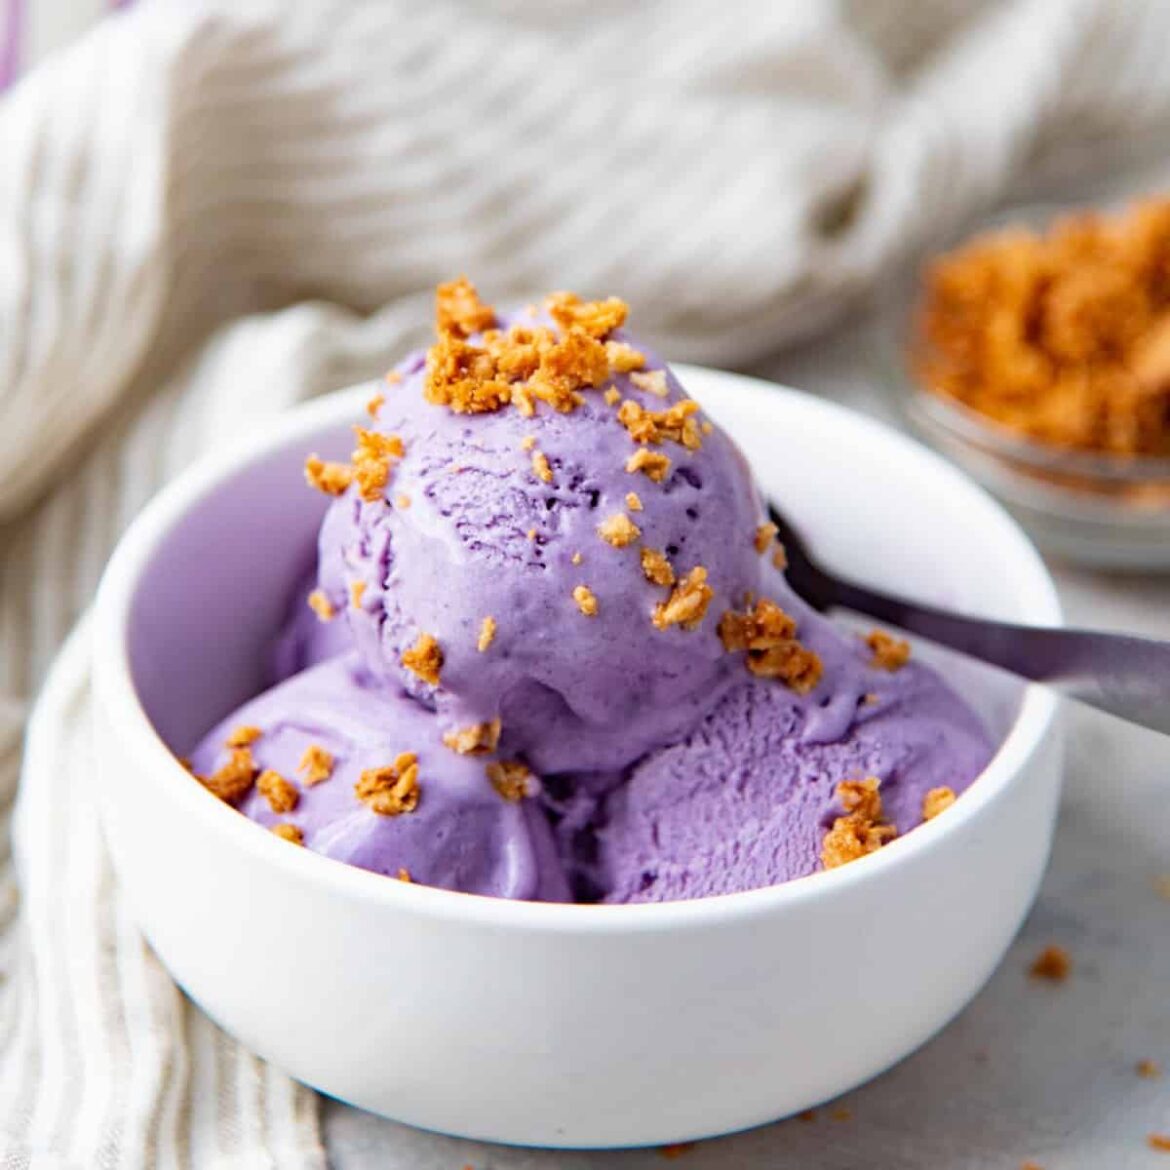 Ice Cream Market Overview, Industry Growth Rate, Research Report 2022-2027